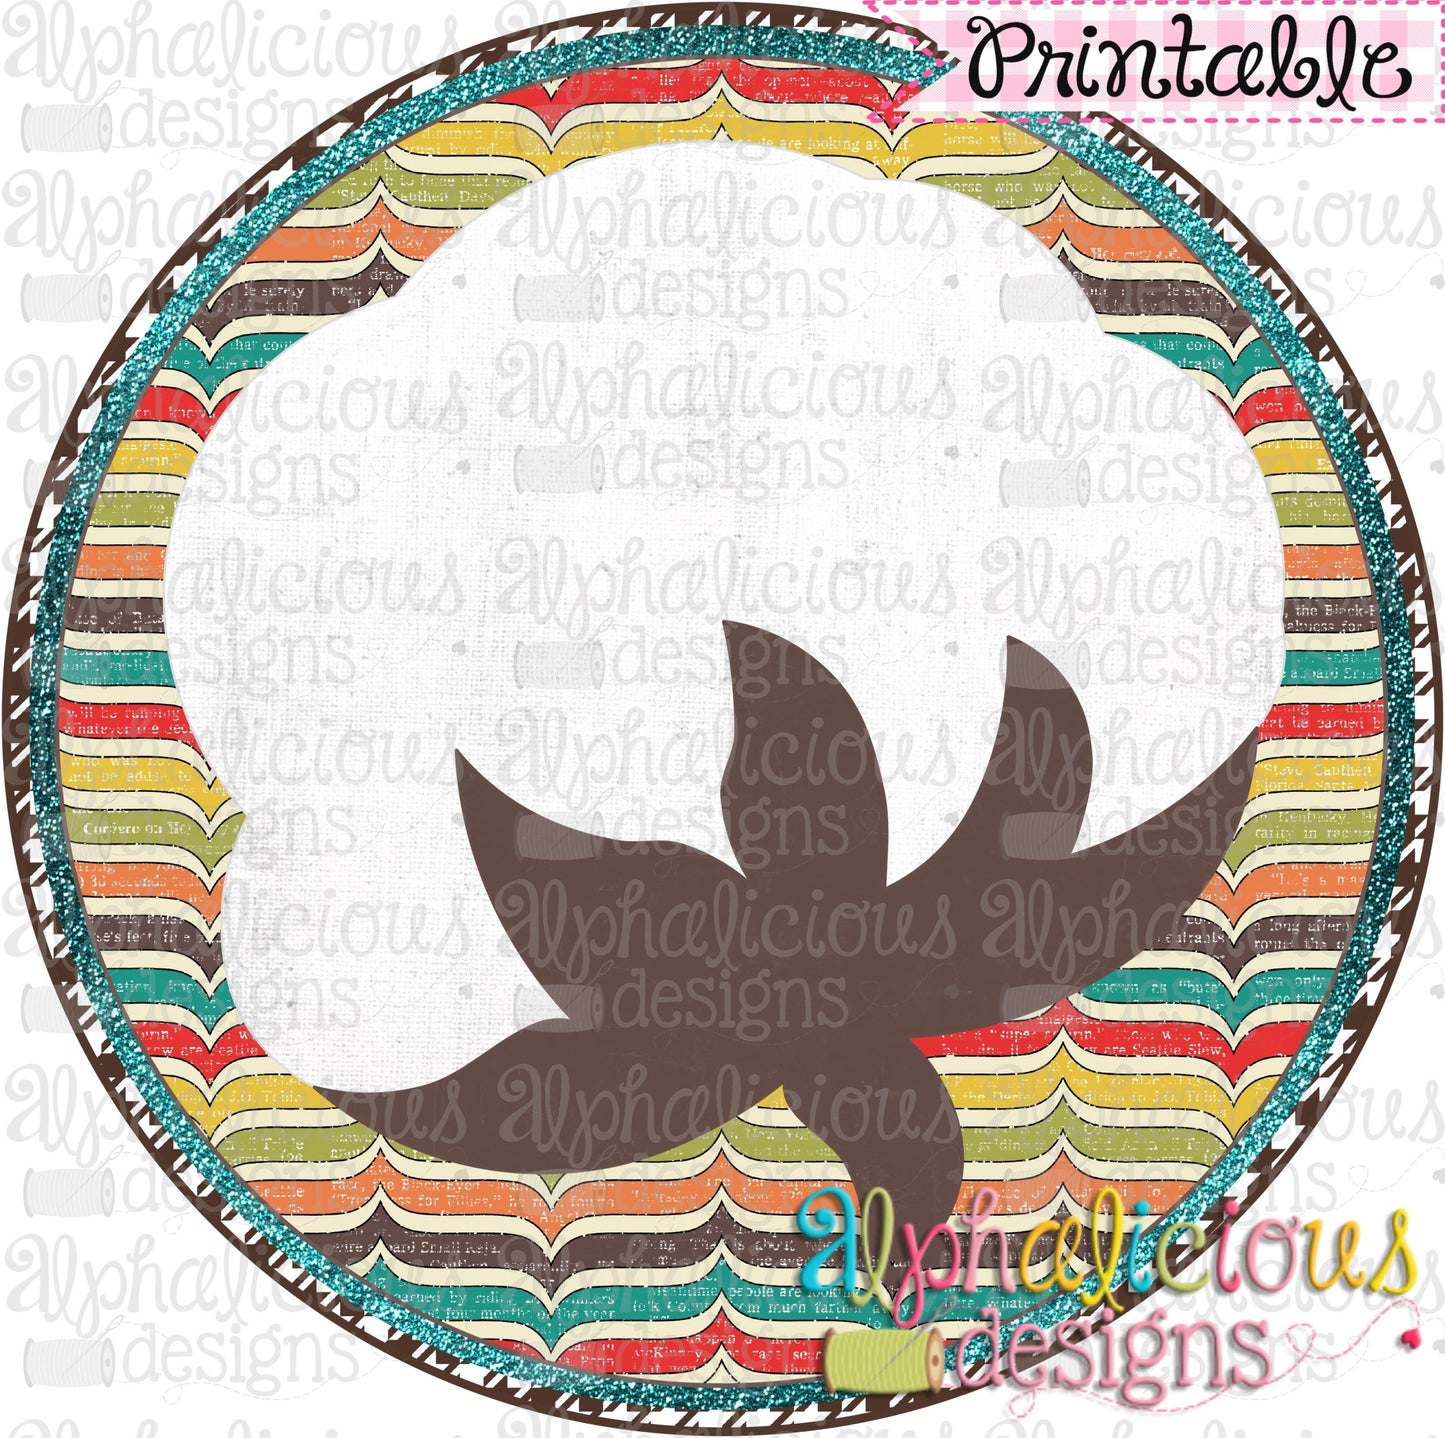 Cotton Boll in Circle Frame-Printable